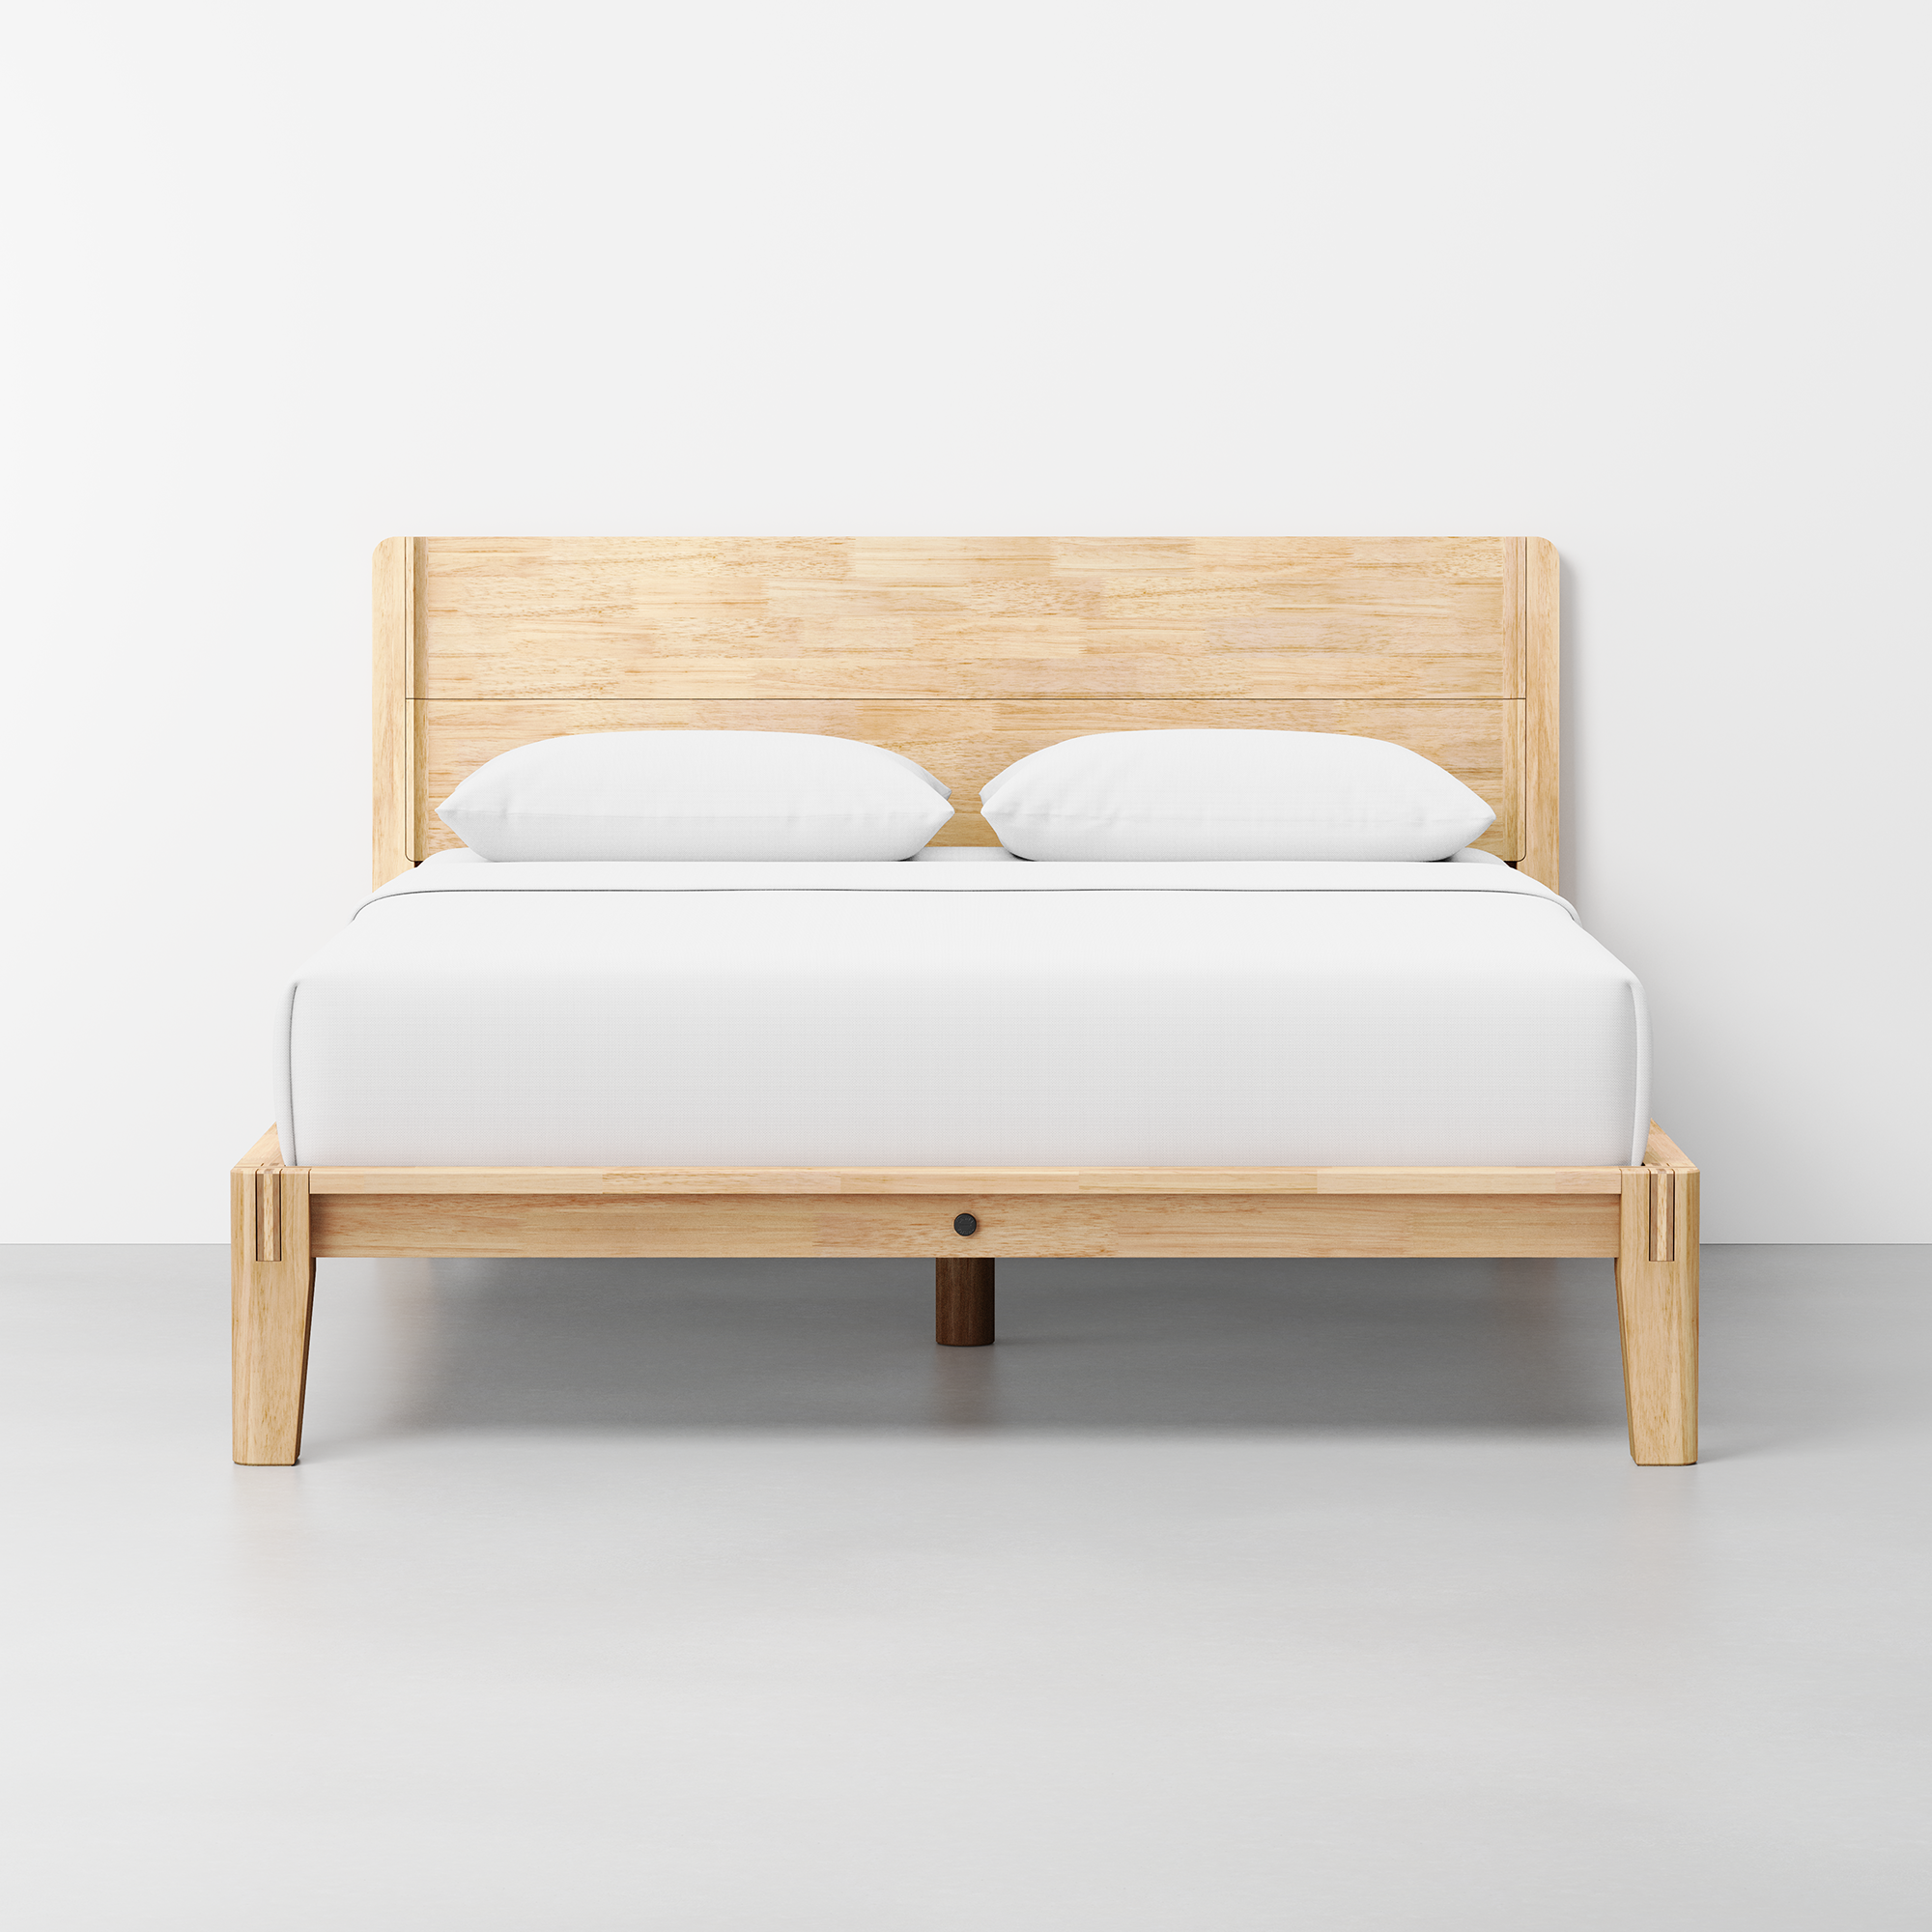 The Bed (Natural / Headboard) - Render - Front